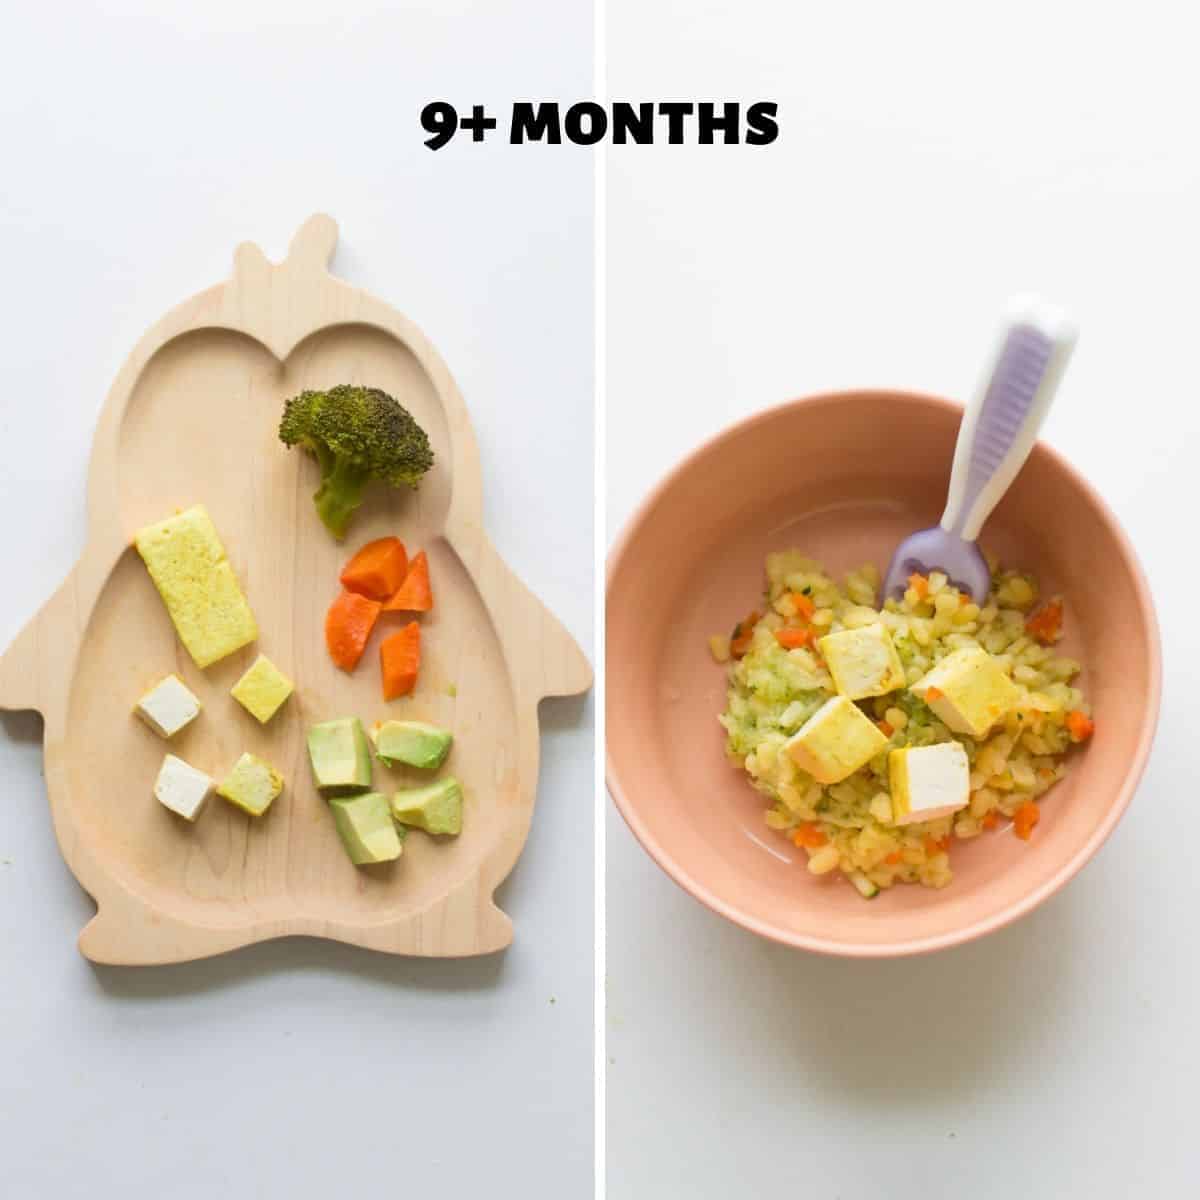 a two image collage showing examples of how to serve tofu to babies nine months and up.